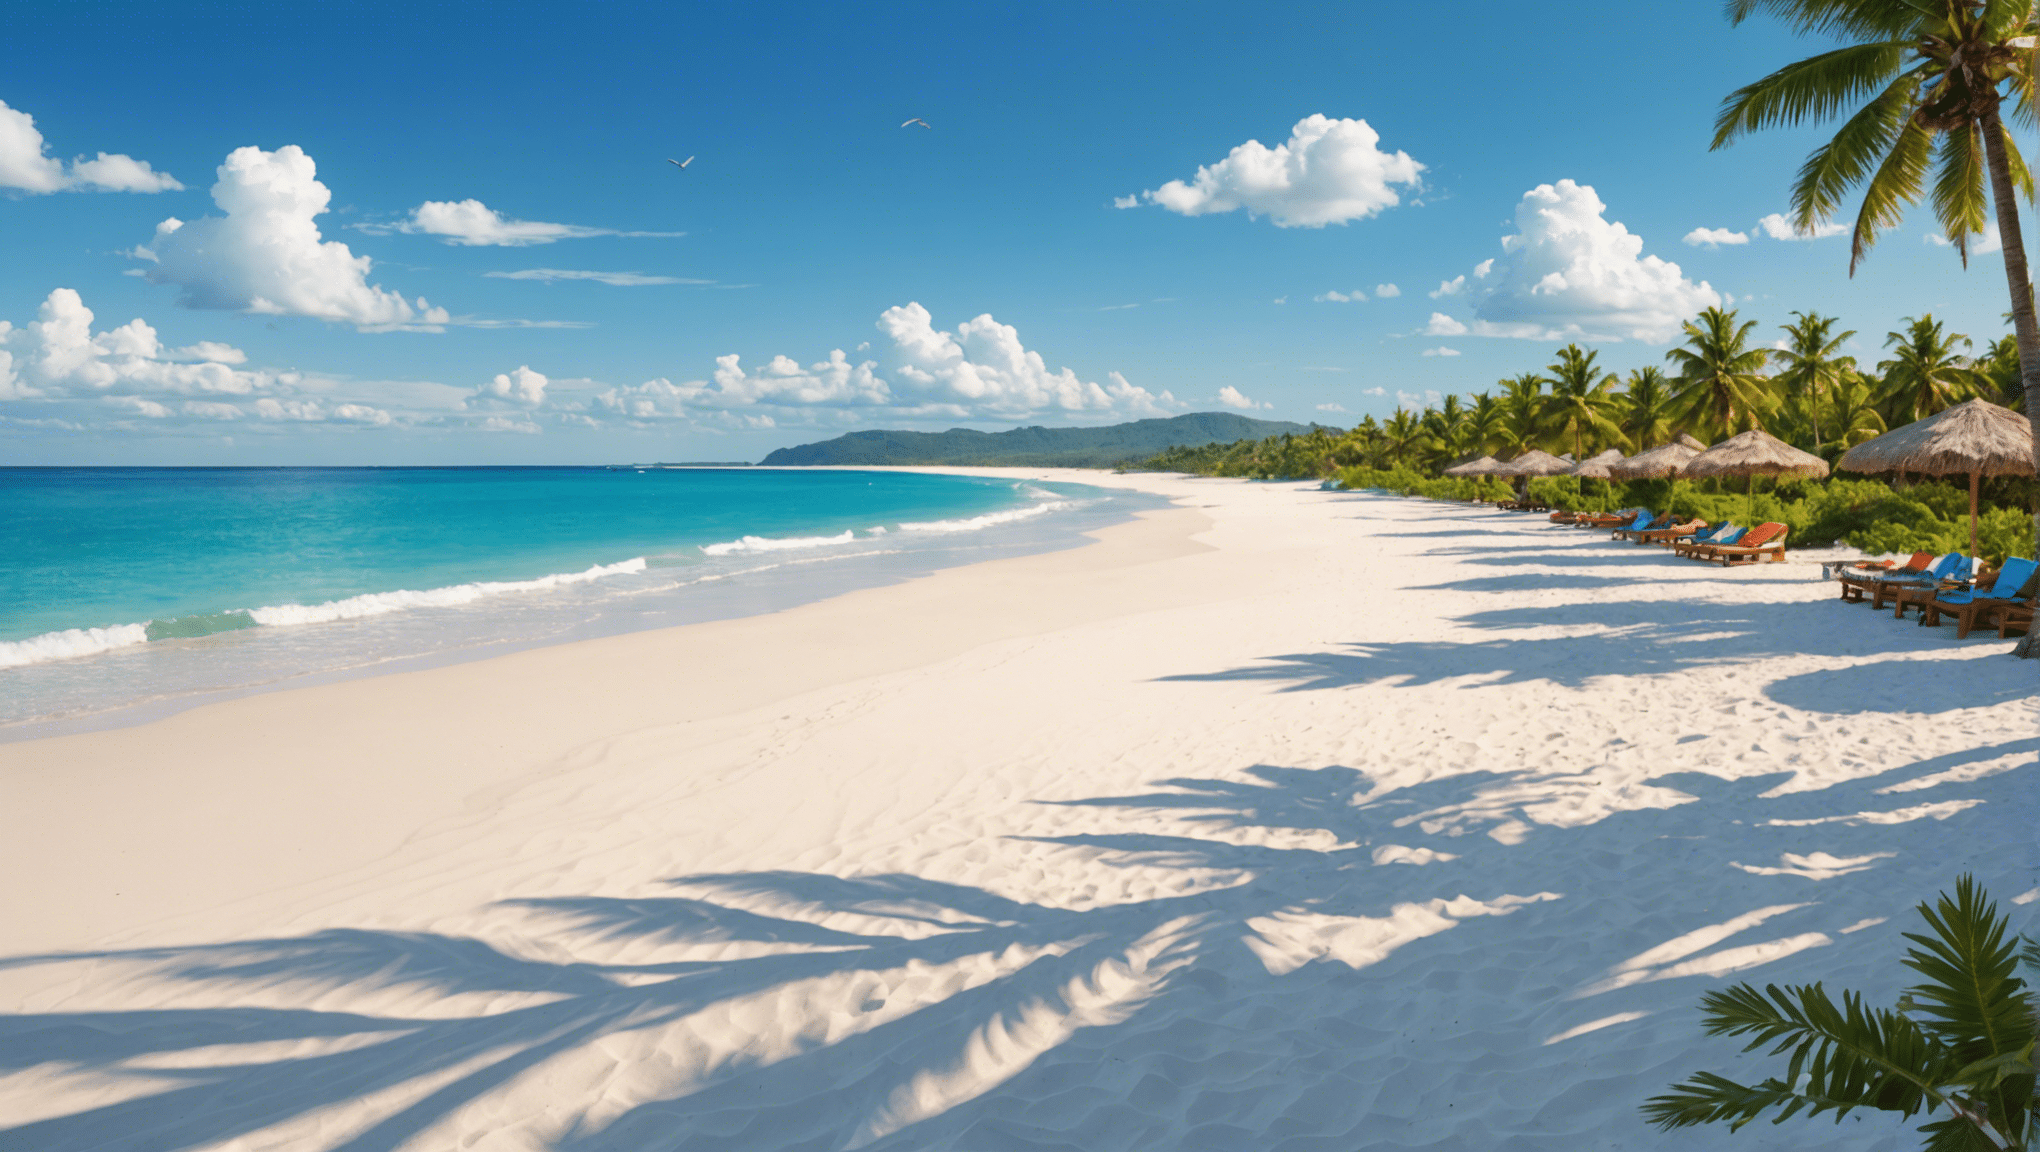 discover the most beautiful white sand beaches around the world and let yourself be enchanted by their beauty and serenity.